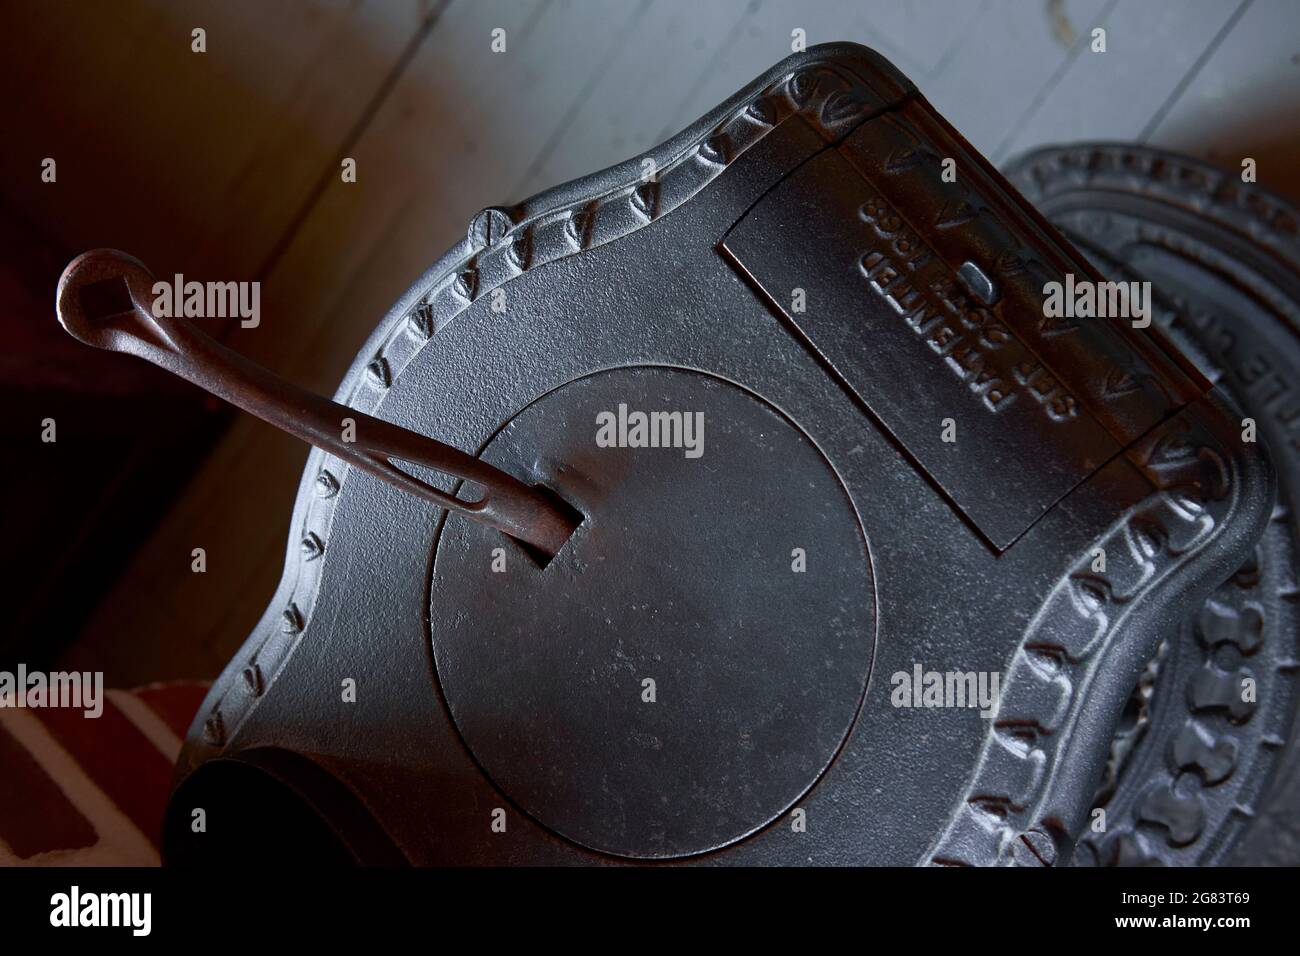 A cast iron coal stove is seen viewed from above in a rustic setting. Stock Photo